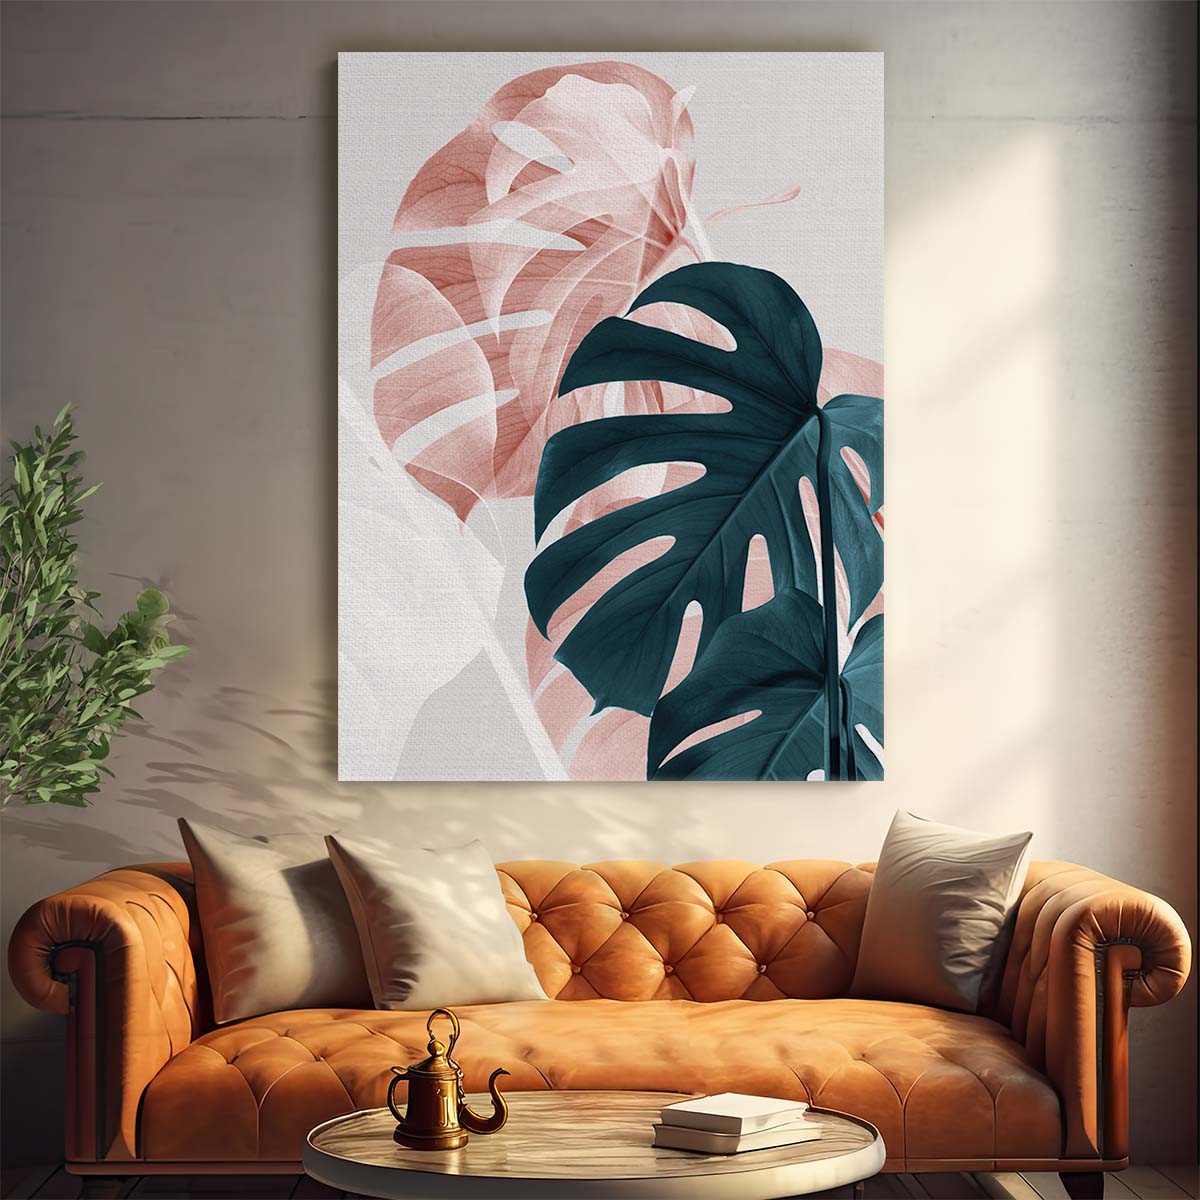 Botanical Monstera Leaf Double Exposure Photography Art in Pink by Luxuriance Designs, made in USA